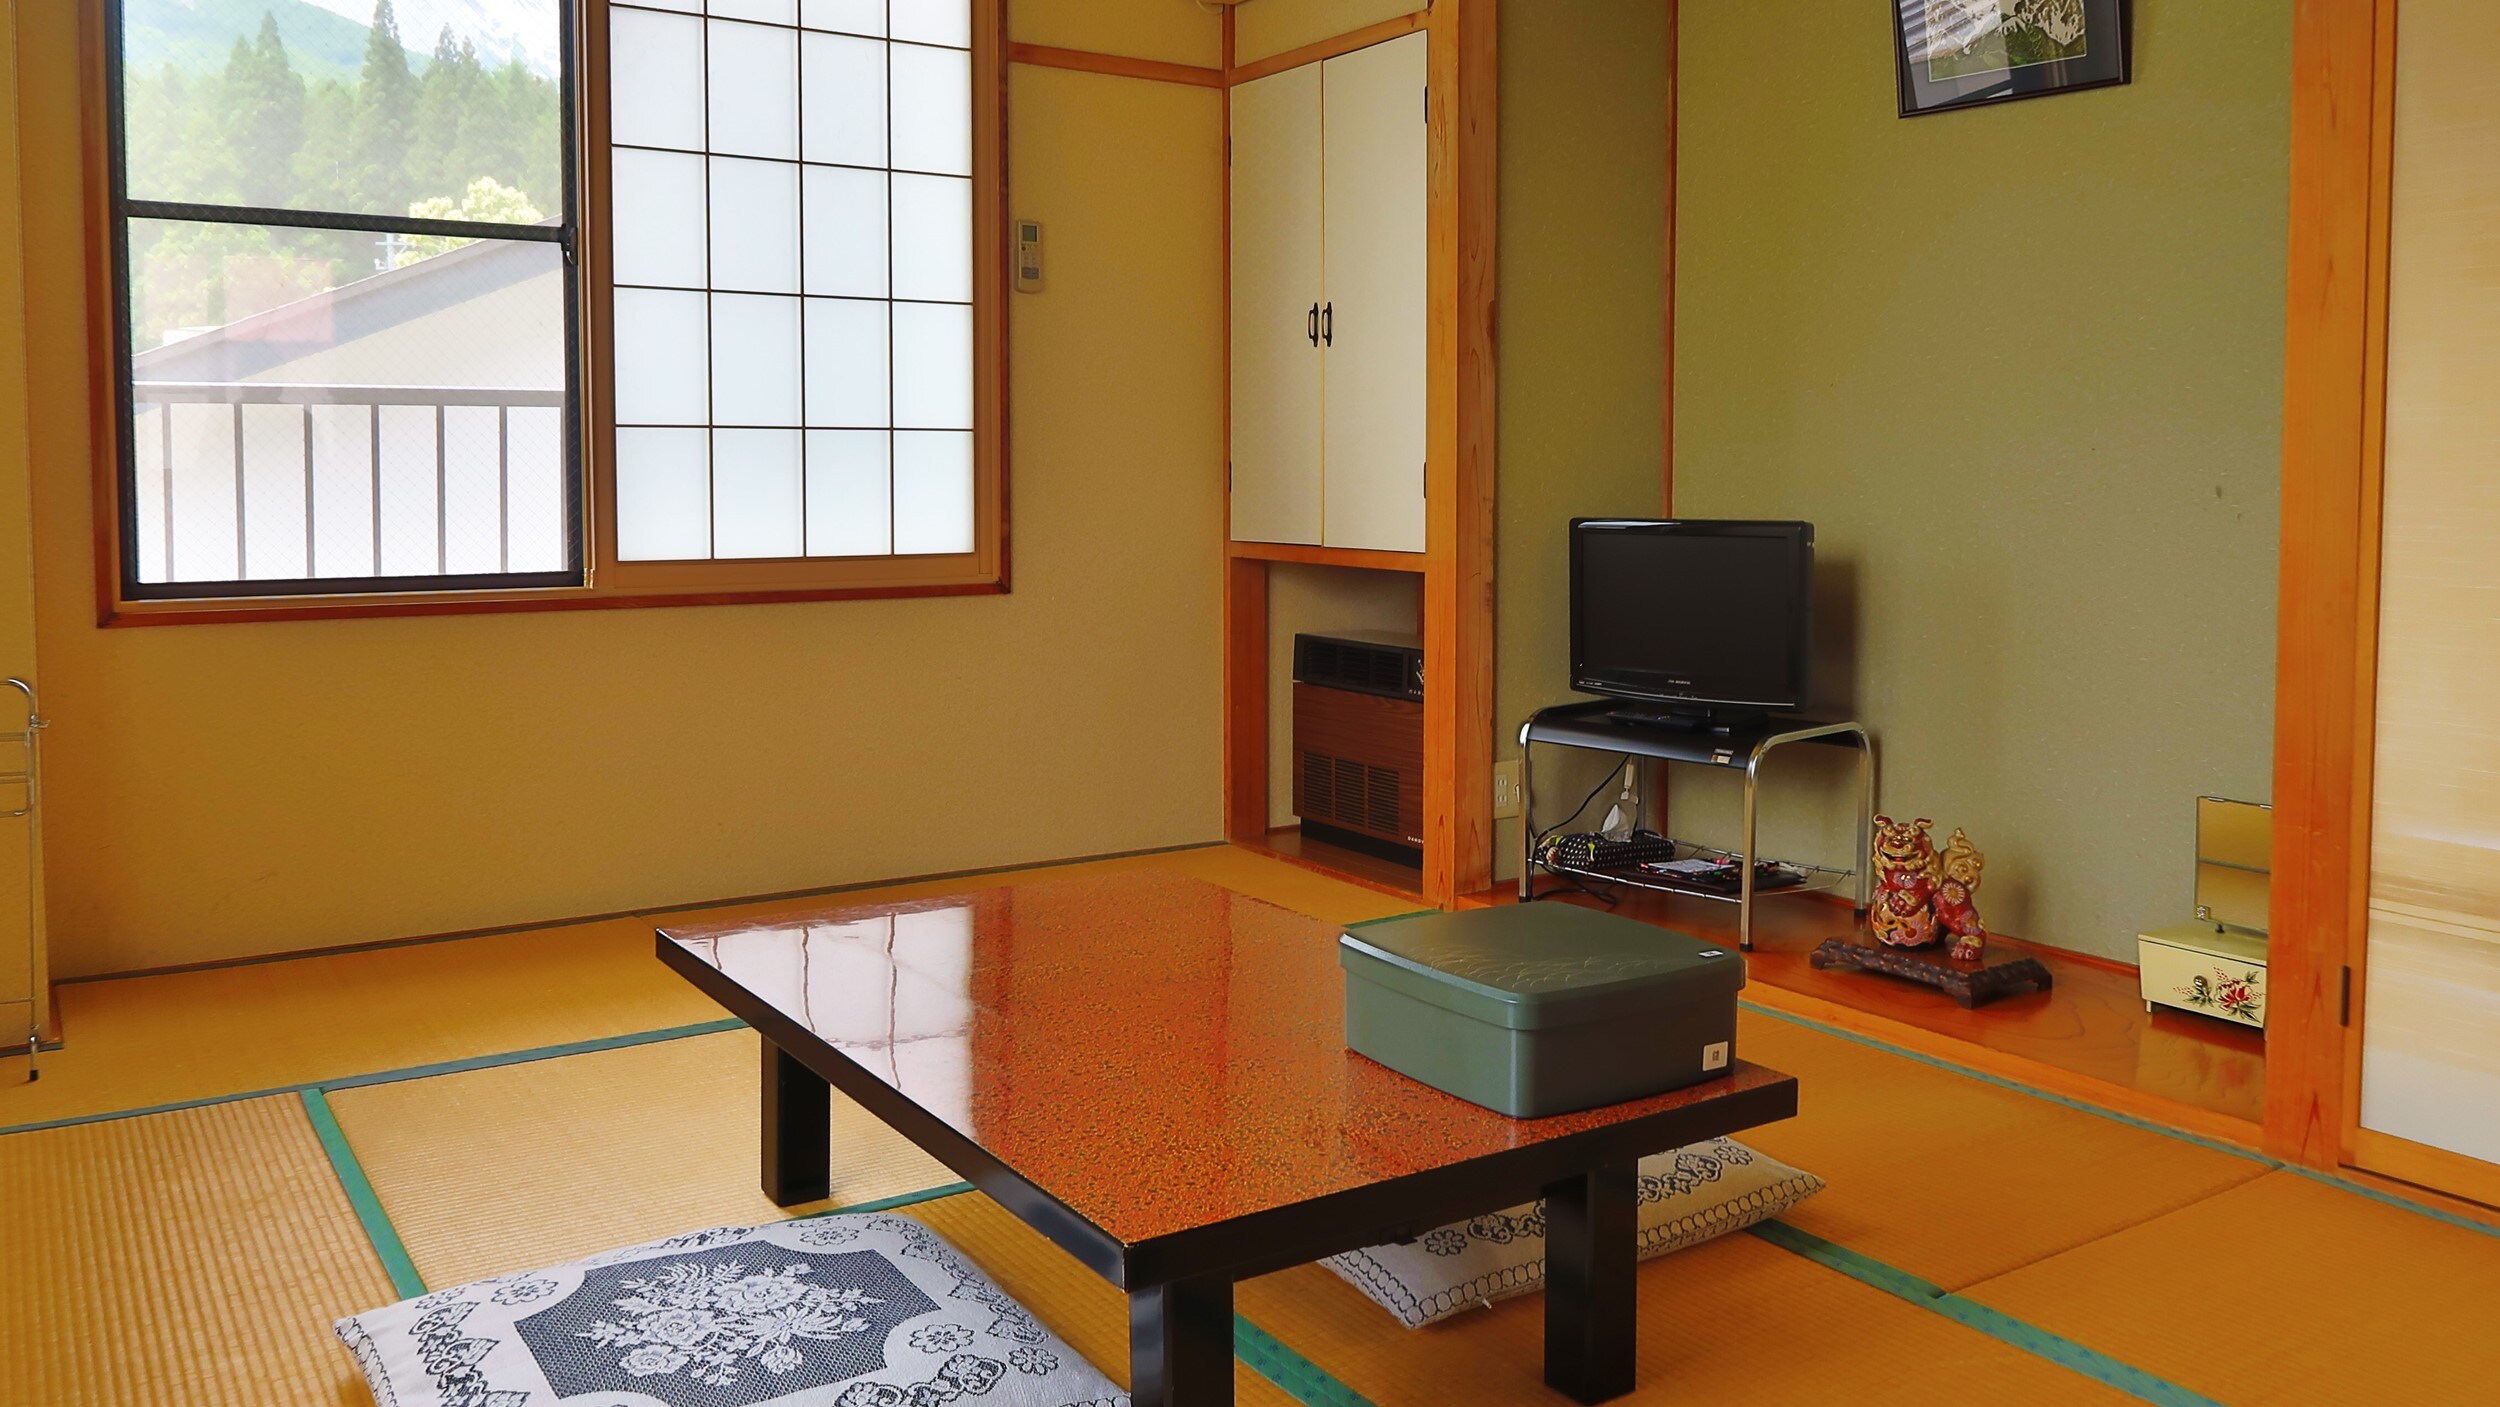 Japanese-style room (example)